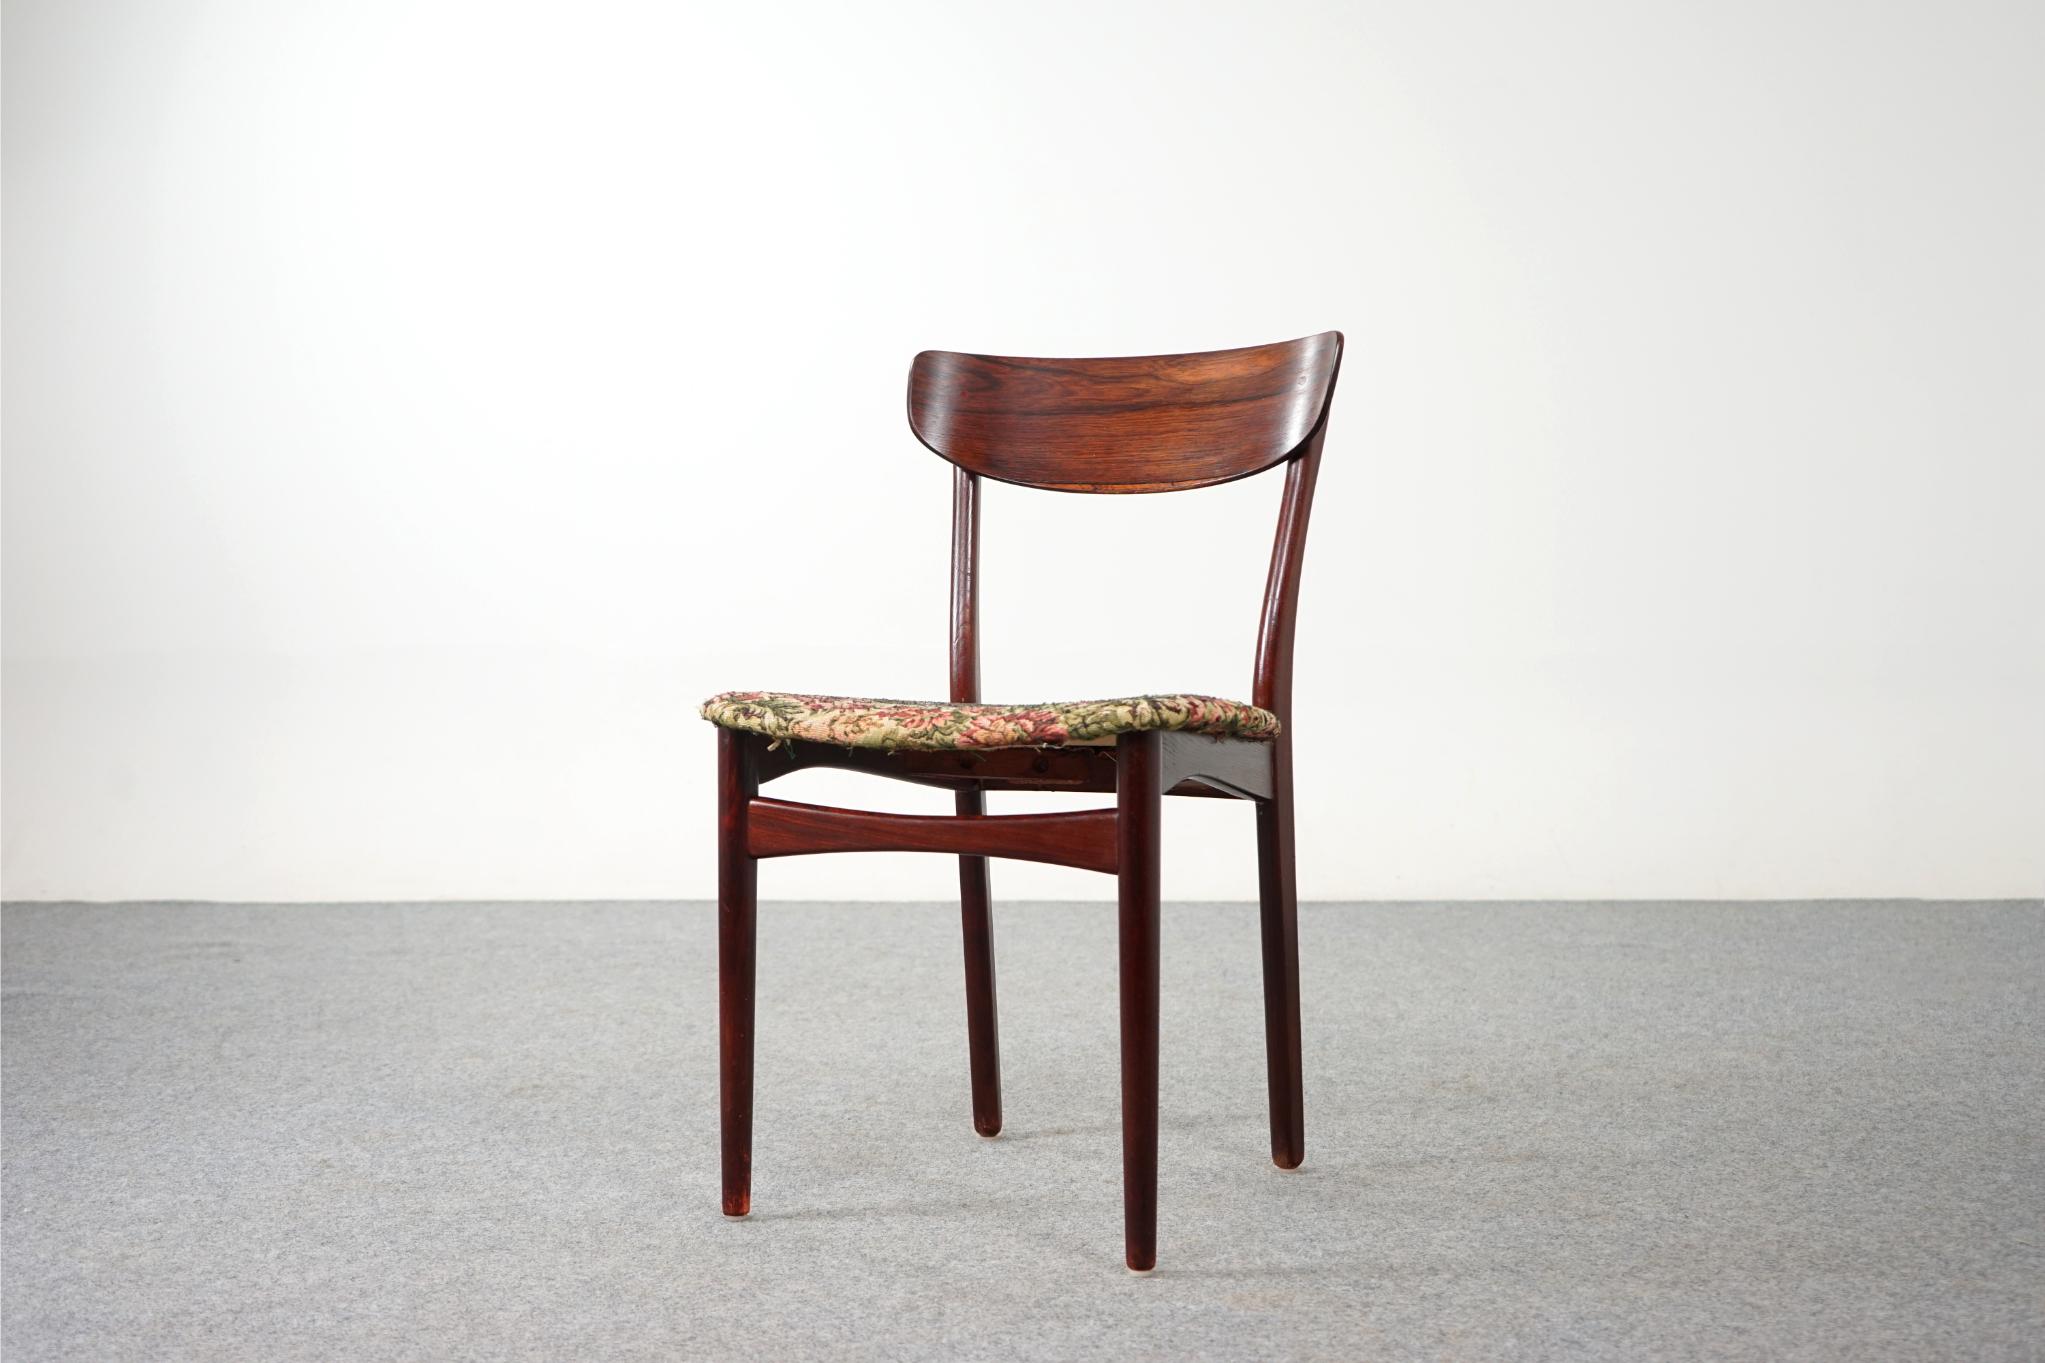 Rosewood Danish dining chairs, circa 1960's. Beautifully curved rosewood backrests and generous seat design provide support and comfort. Solid beechwood stained legs feature cross braces for added stability and support. Removable seat pad makes